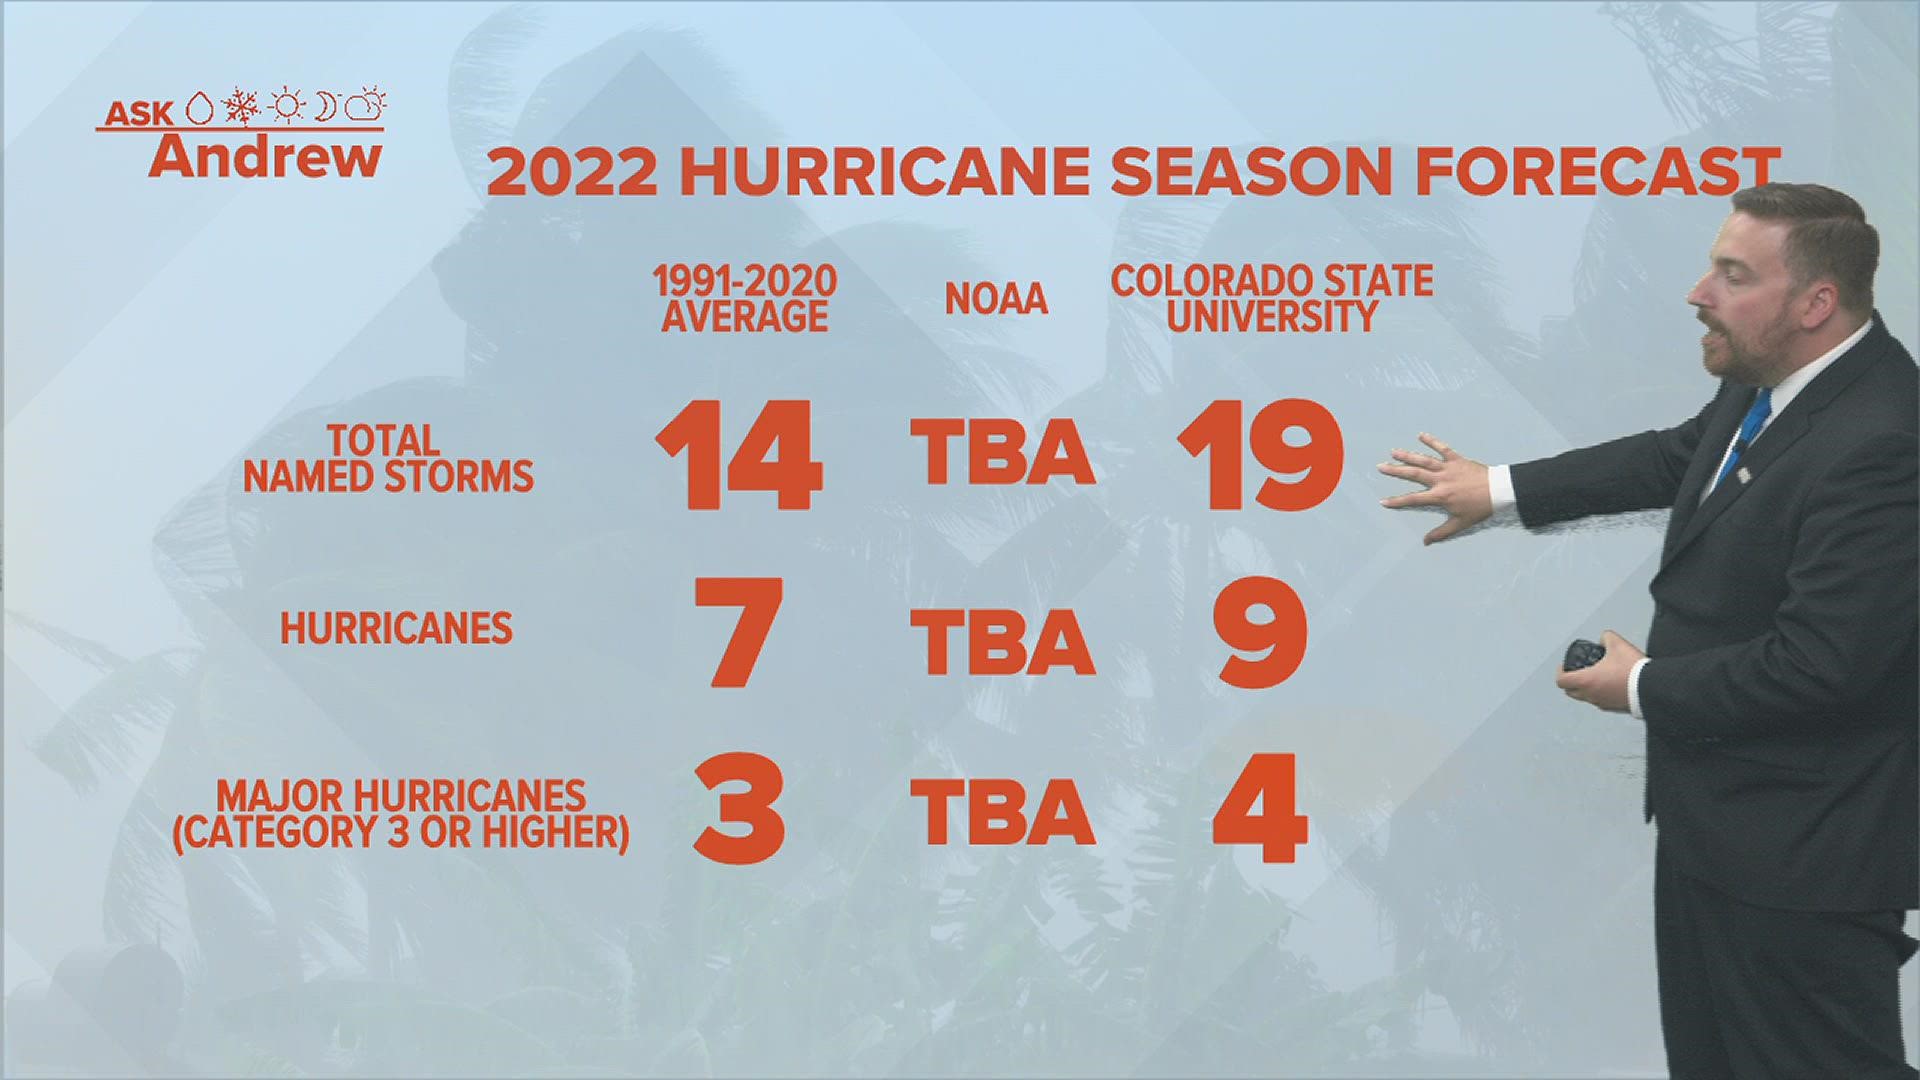 La Niña will continue to influence the global weather pattern through the upcoming summer. Here's how that will impact the 2022 hurricane season.